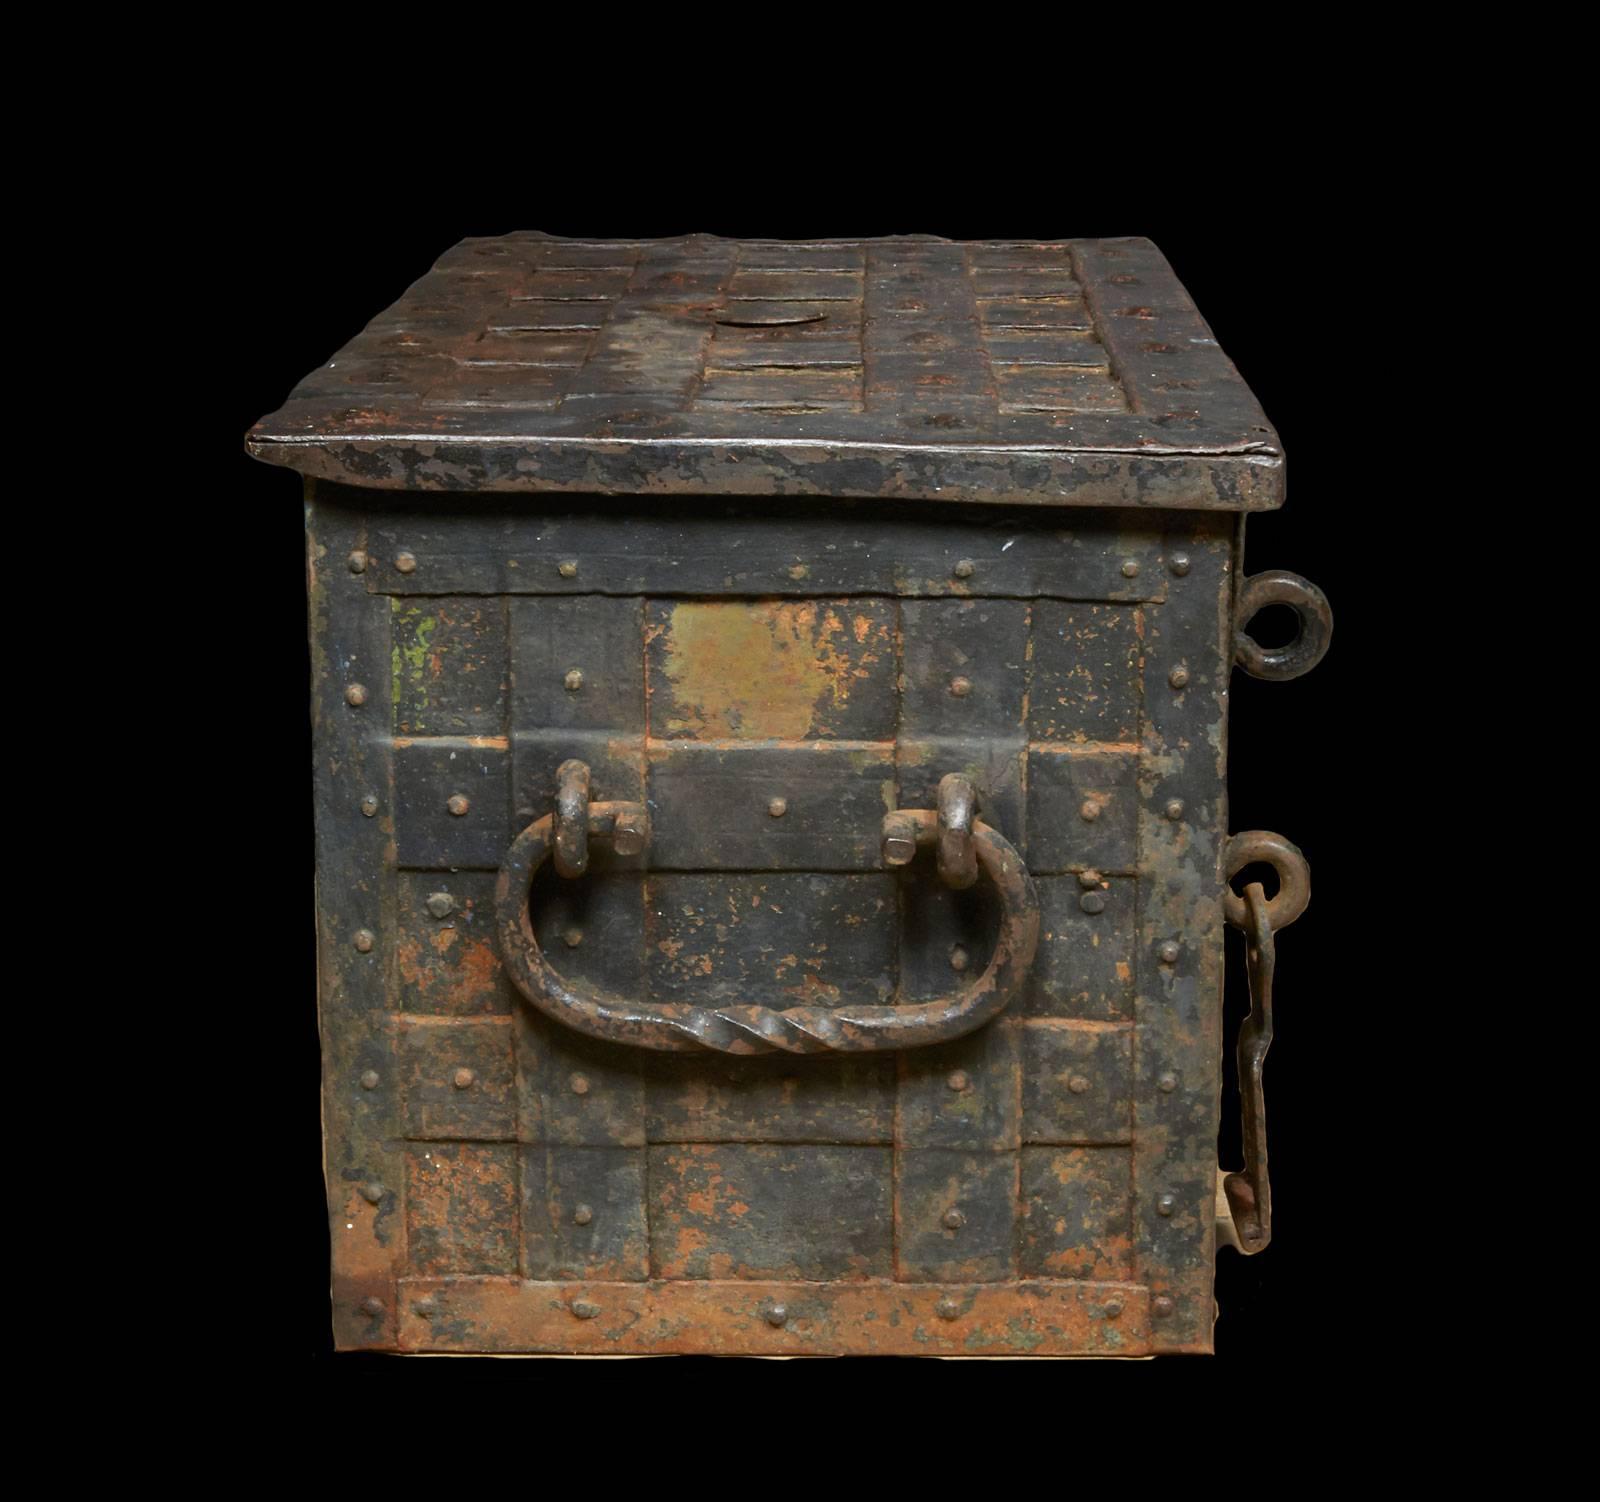 17th century iron trunk with hidden key slot and inner box with separate key. Fabulous locking mechanism.
Perfect as a unique coffee table.